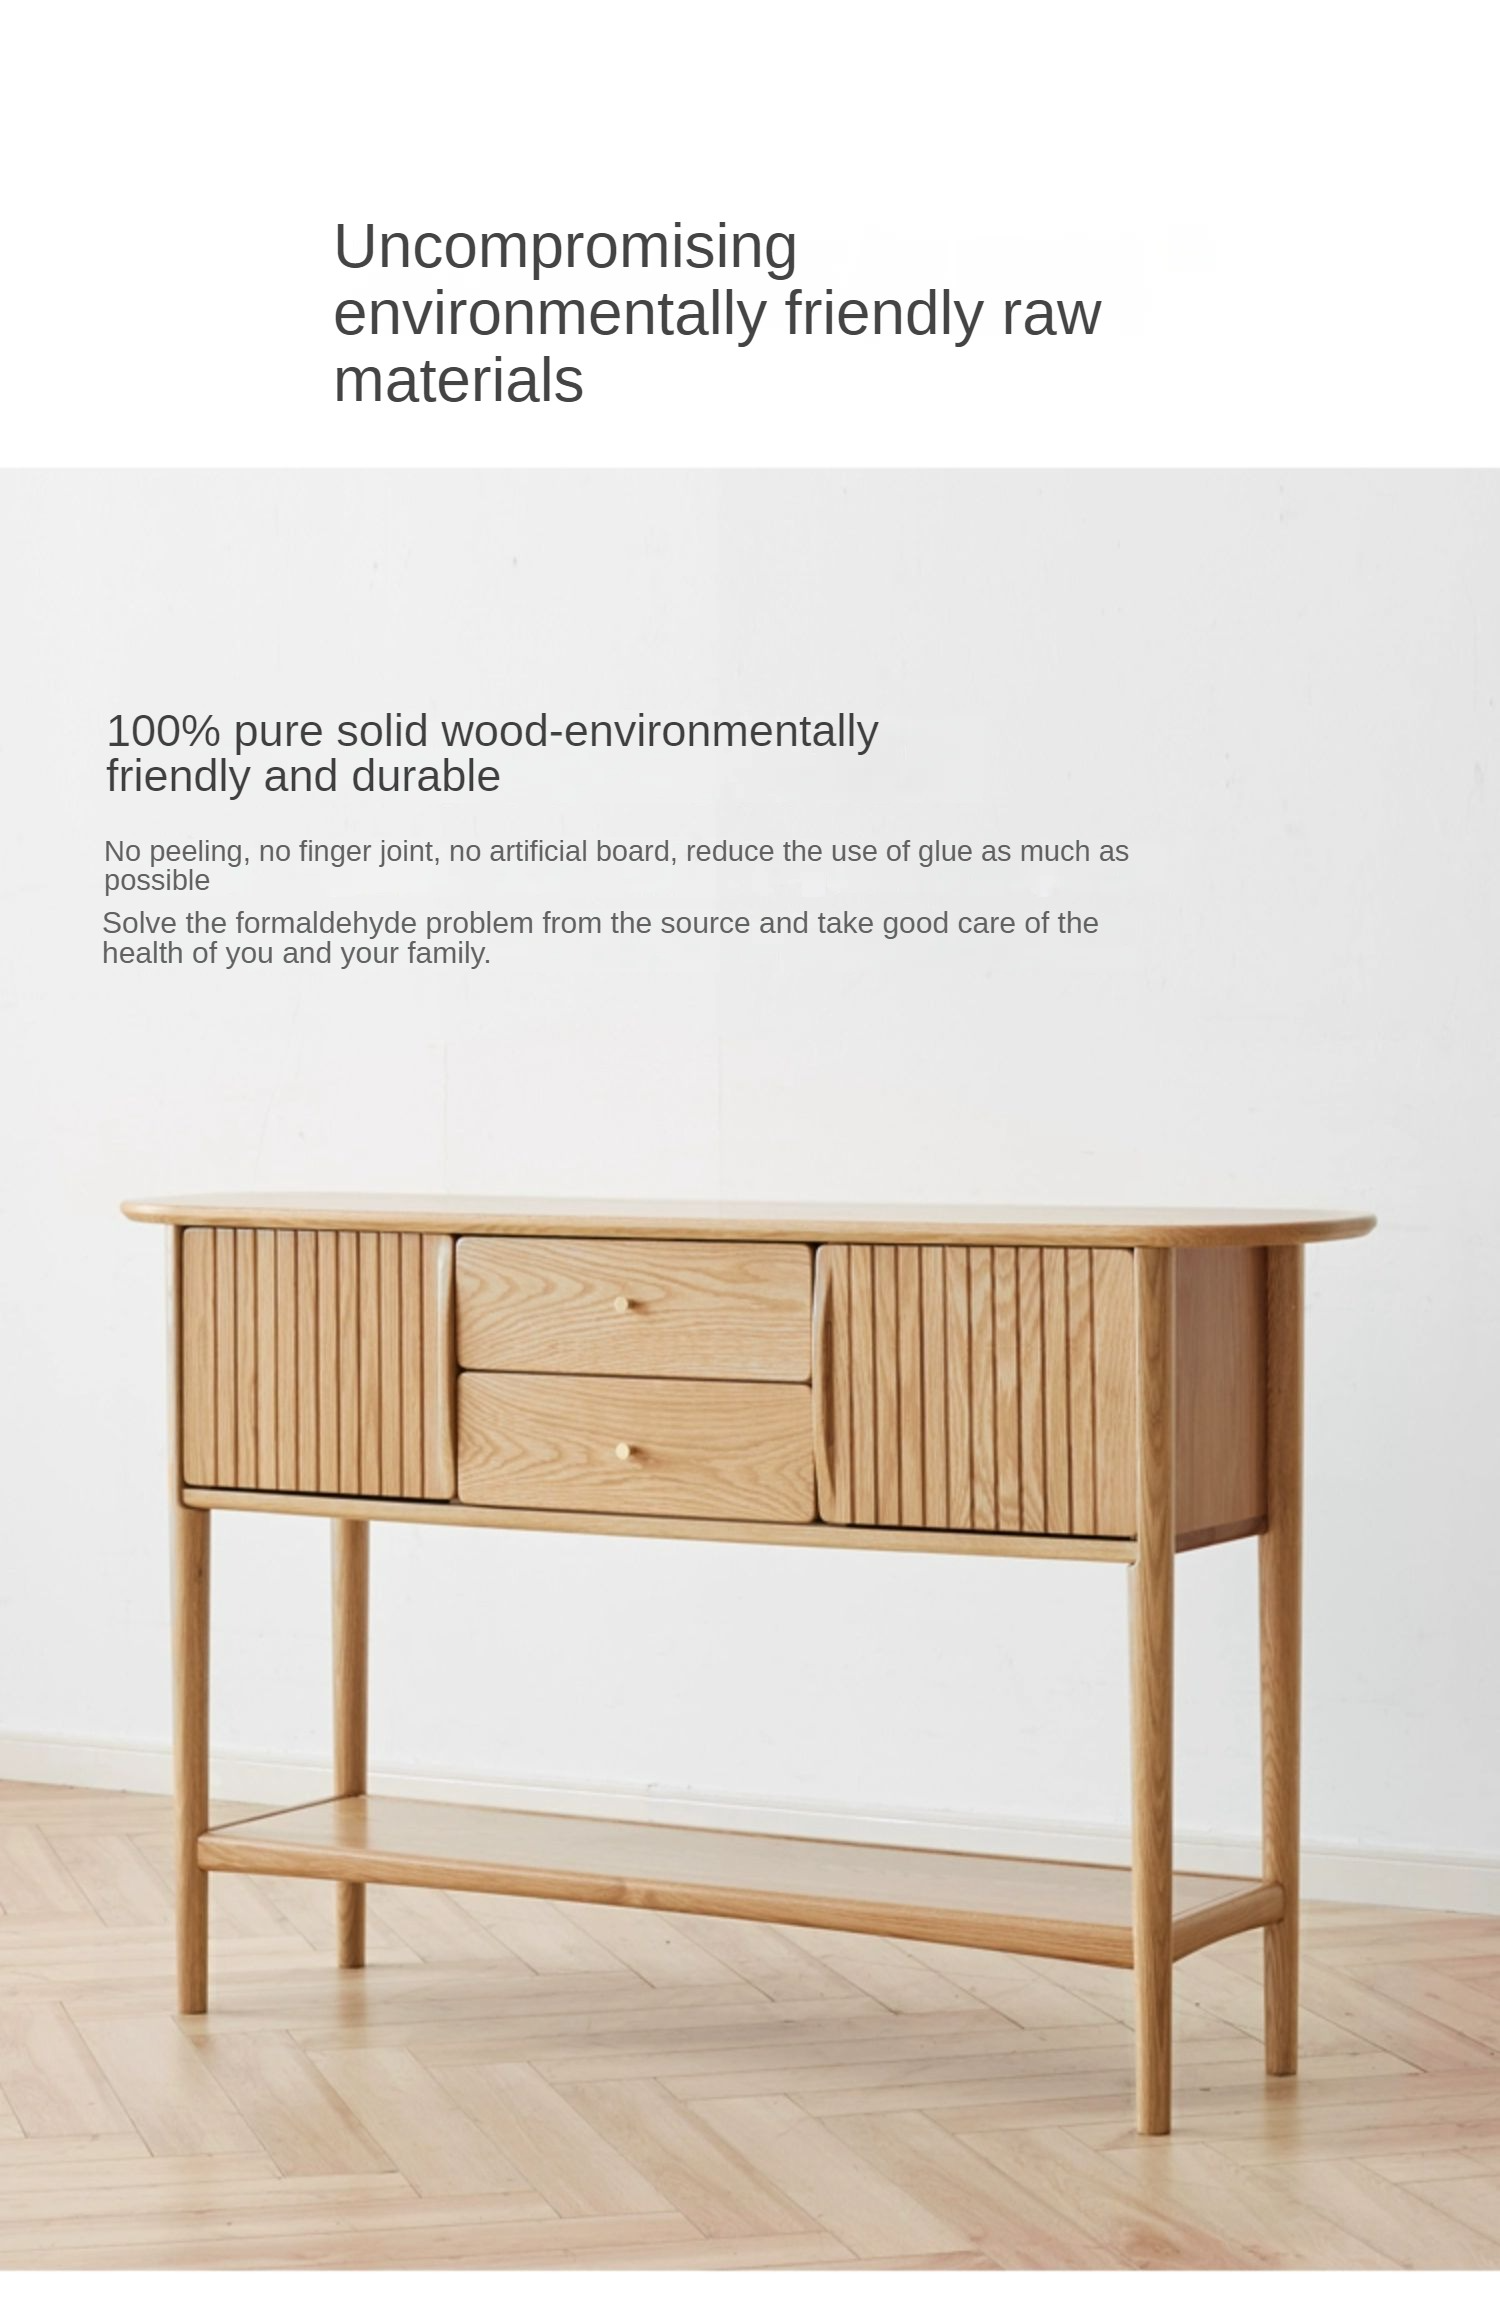 Oak solid wood console table "